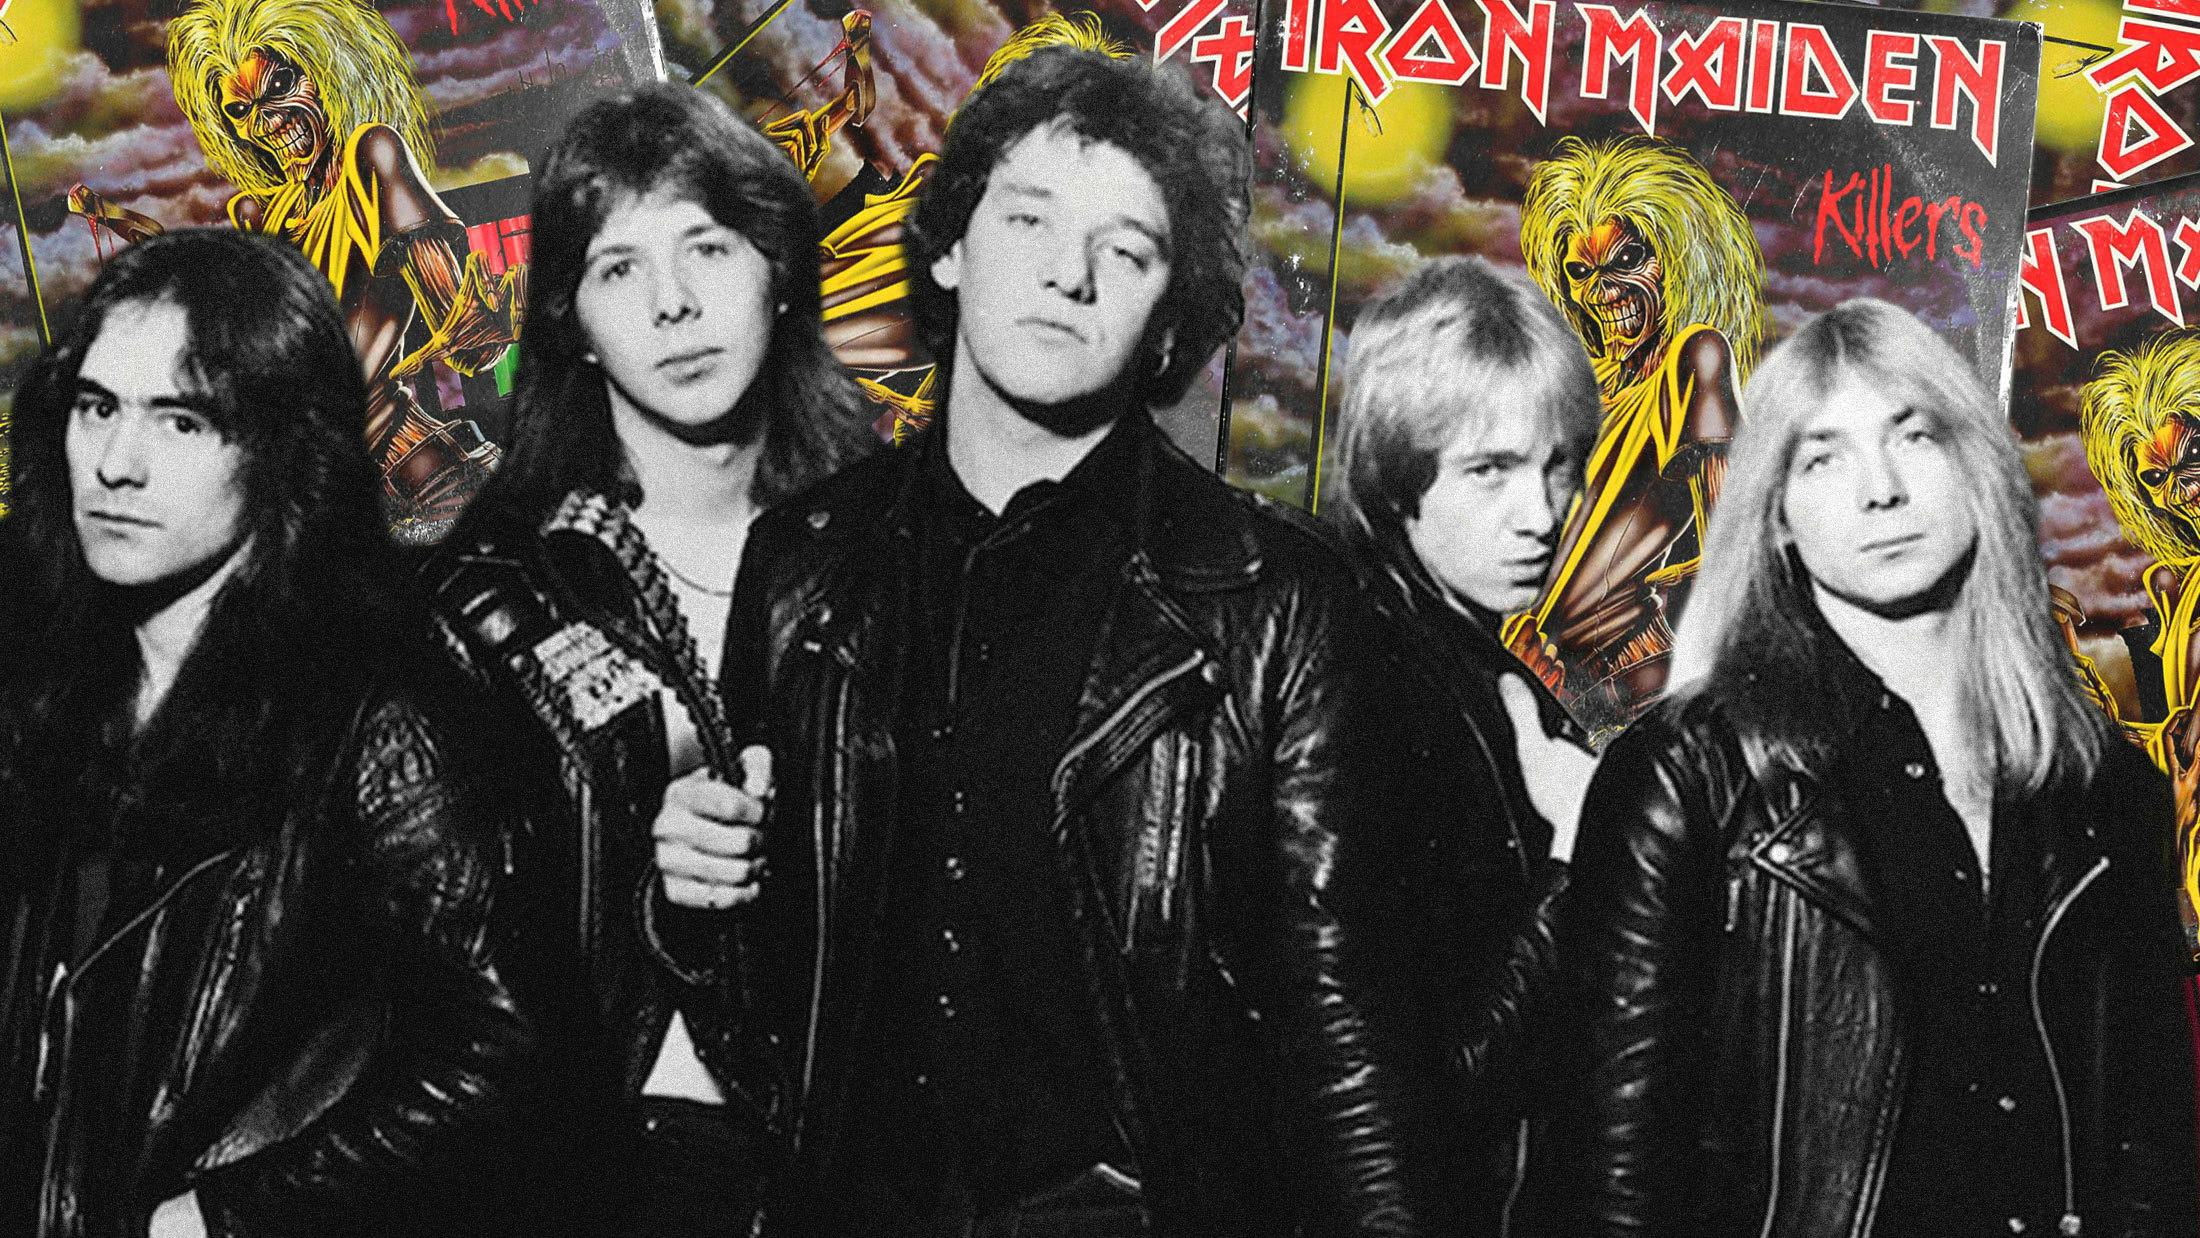 The story behind Killers by Iron Maiden